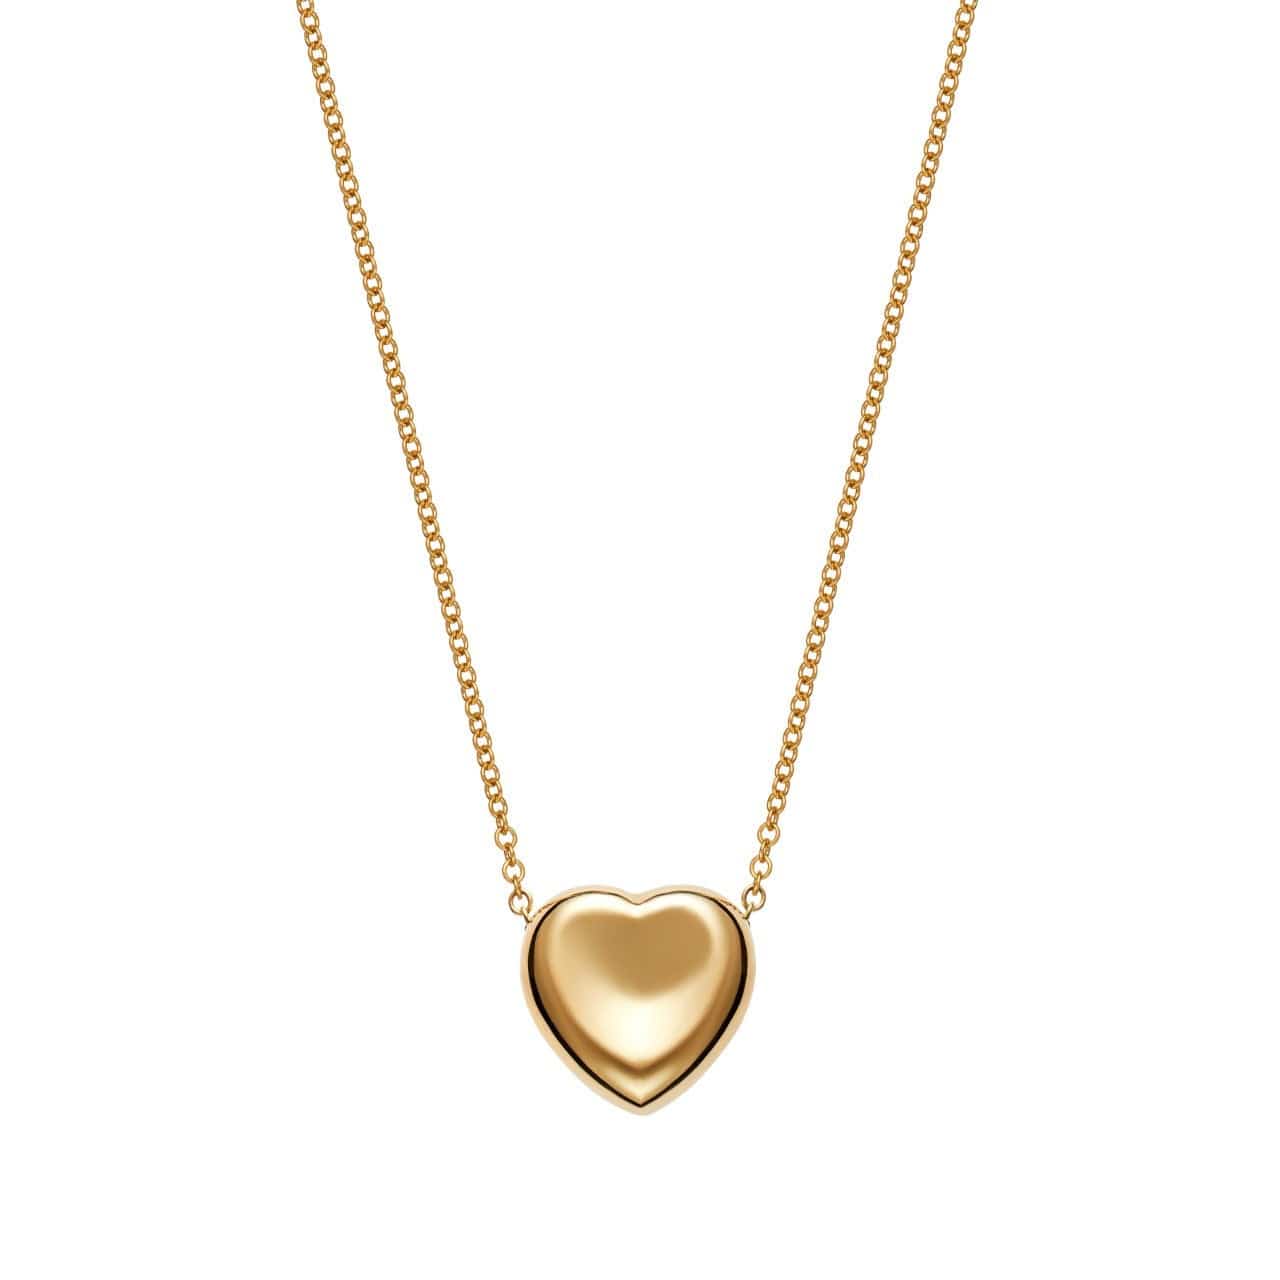 18K Yellow Gold Puffy Heart Pendant Necklace